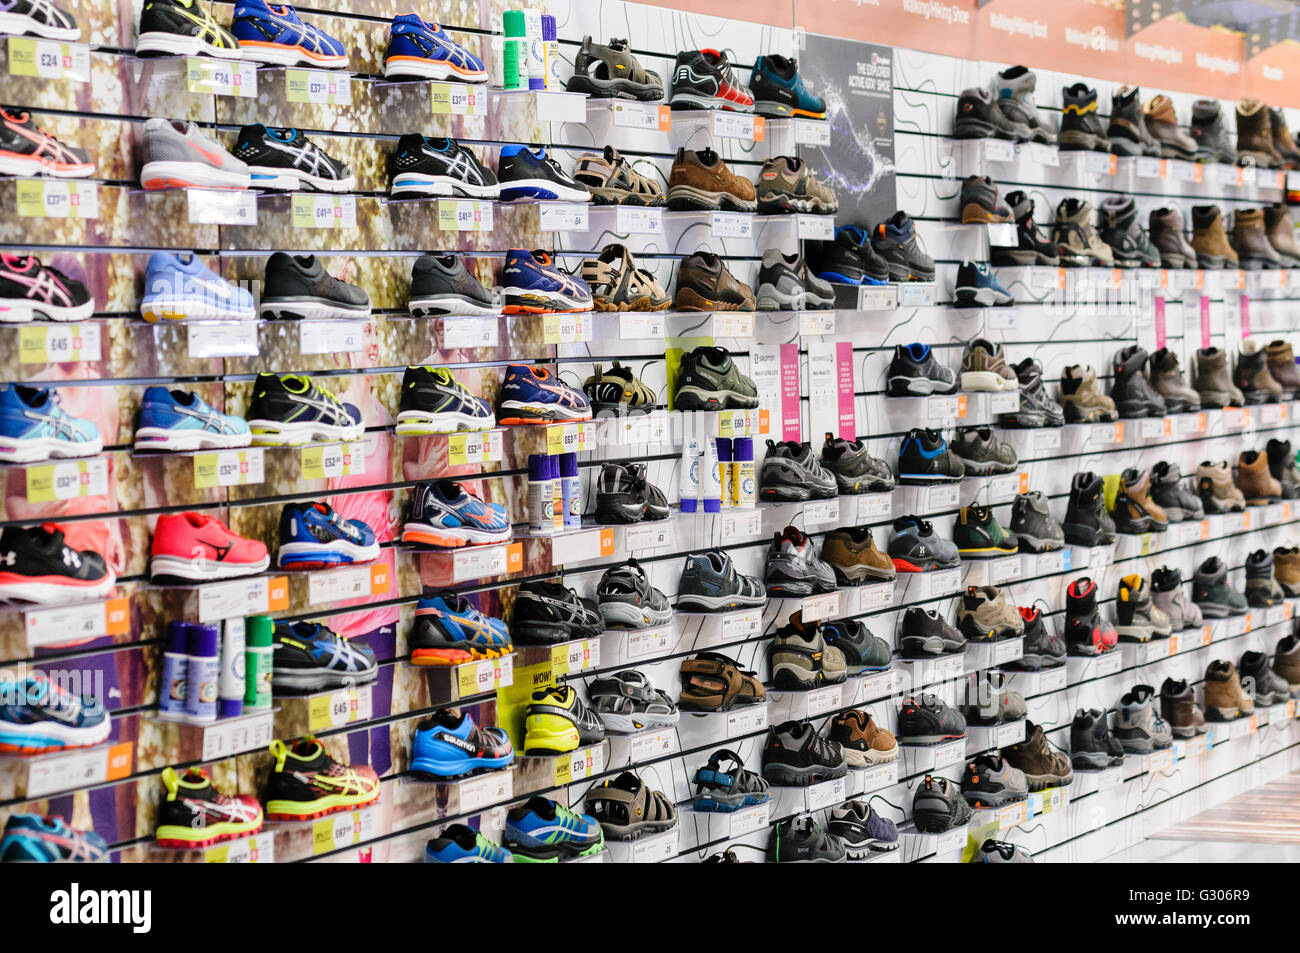 Running and walking shoes, boots and sandals on sale at a Go Outdoors sports shop. Stock Photo